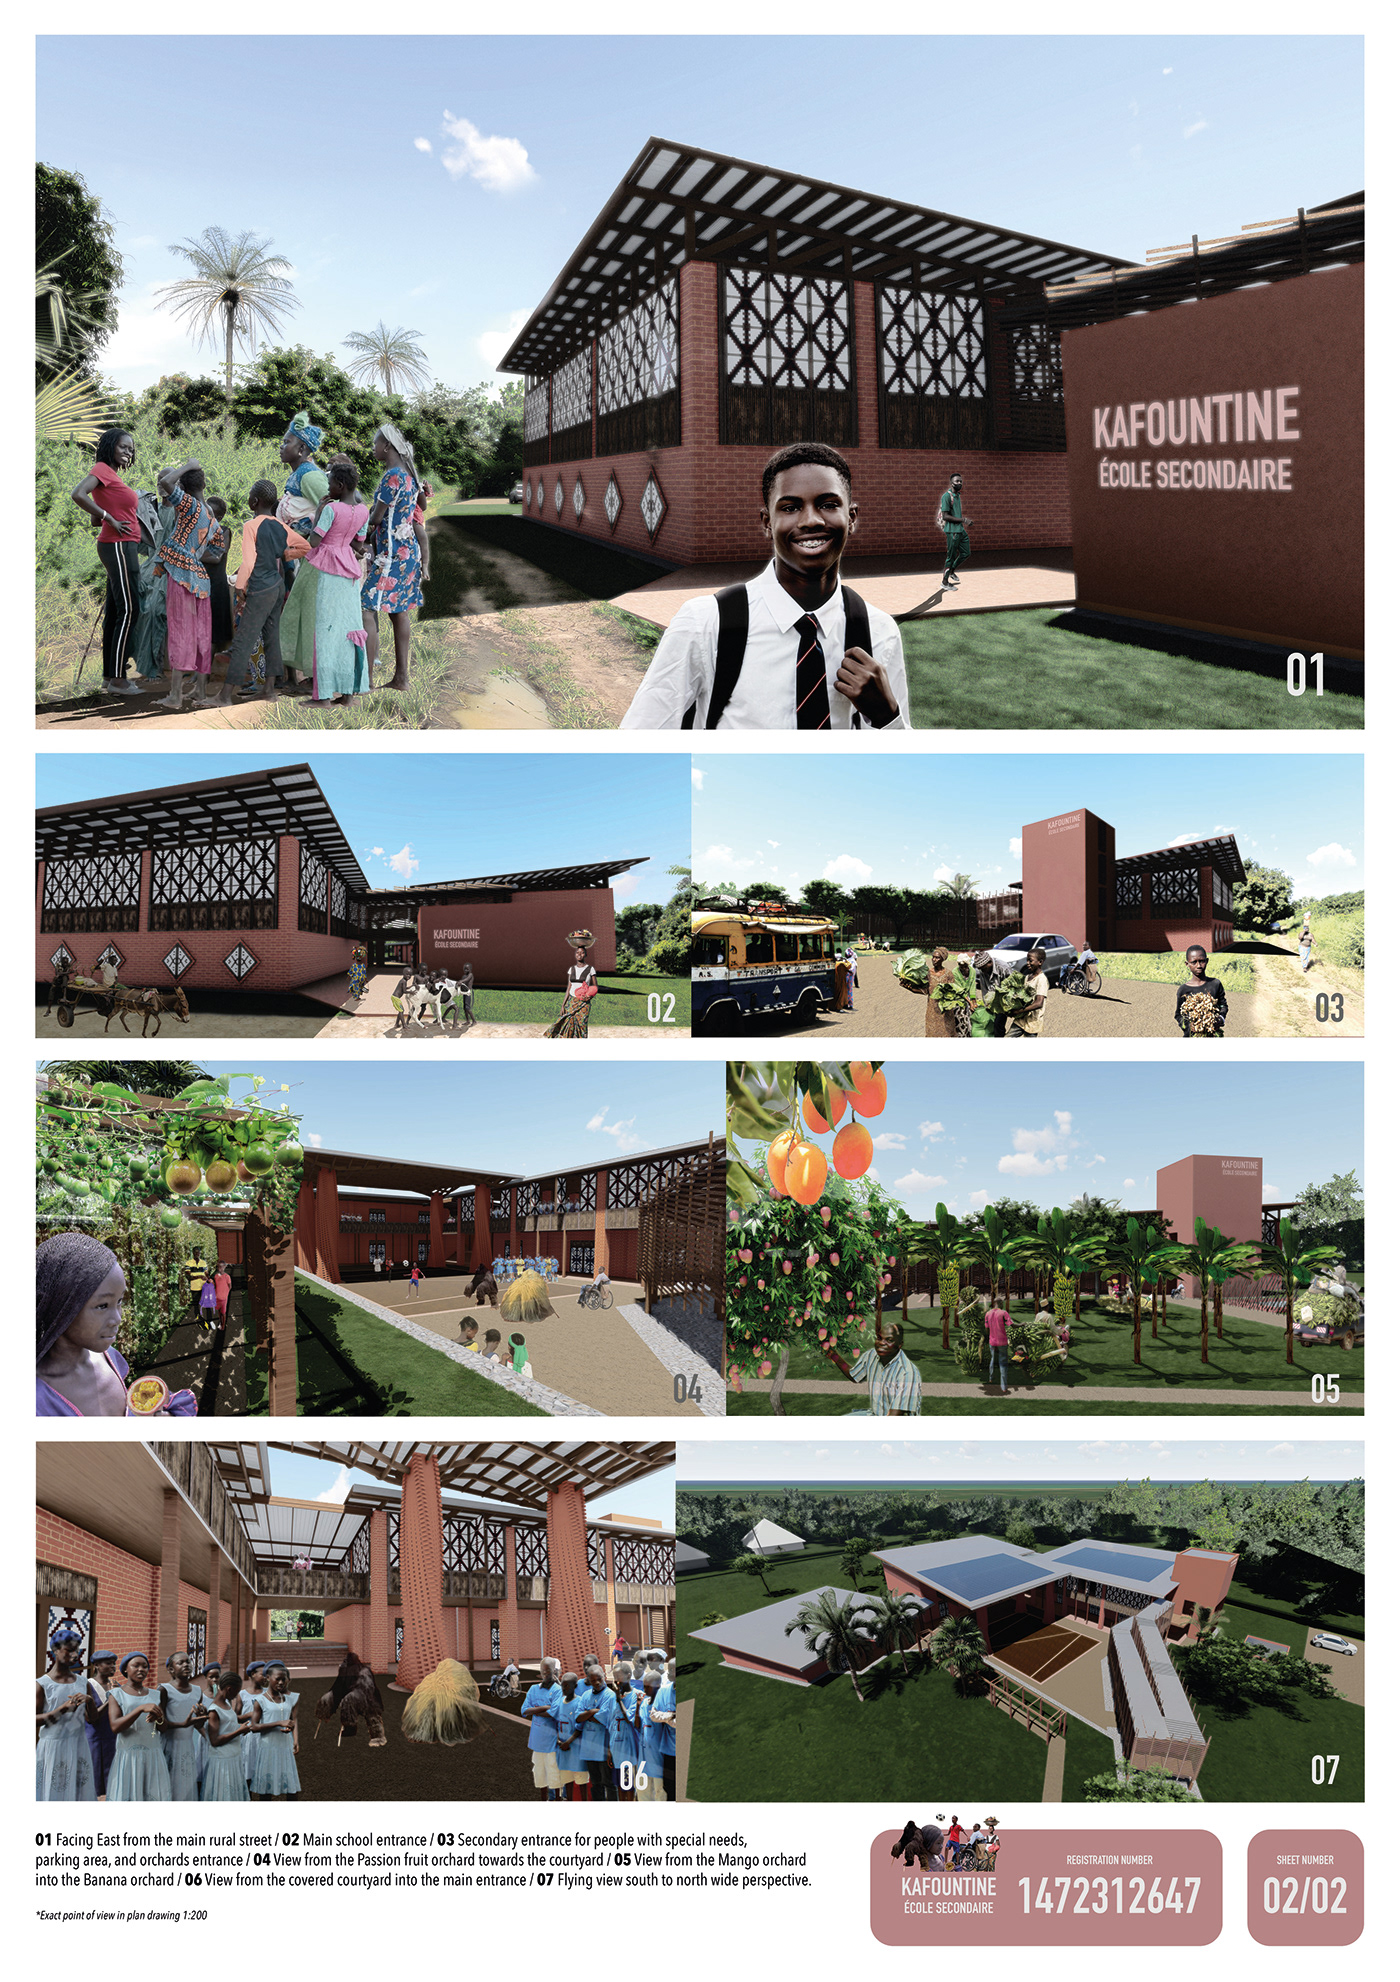 Competition architecture Render visualization 3D exterior Sustainability Sustainable Design permaculture